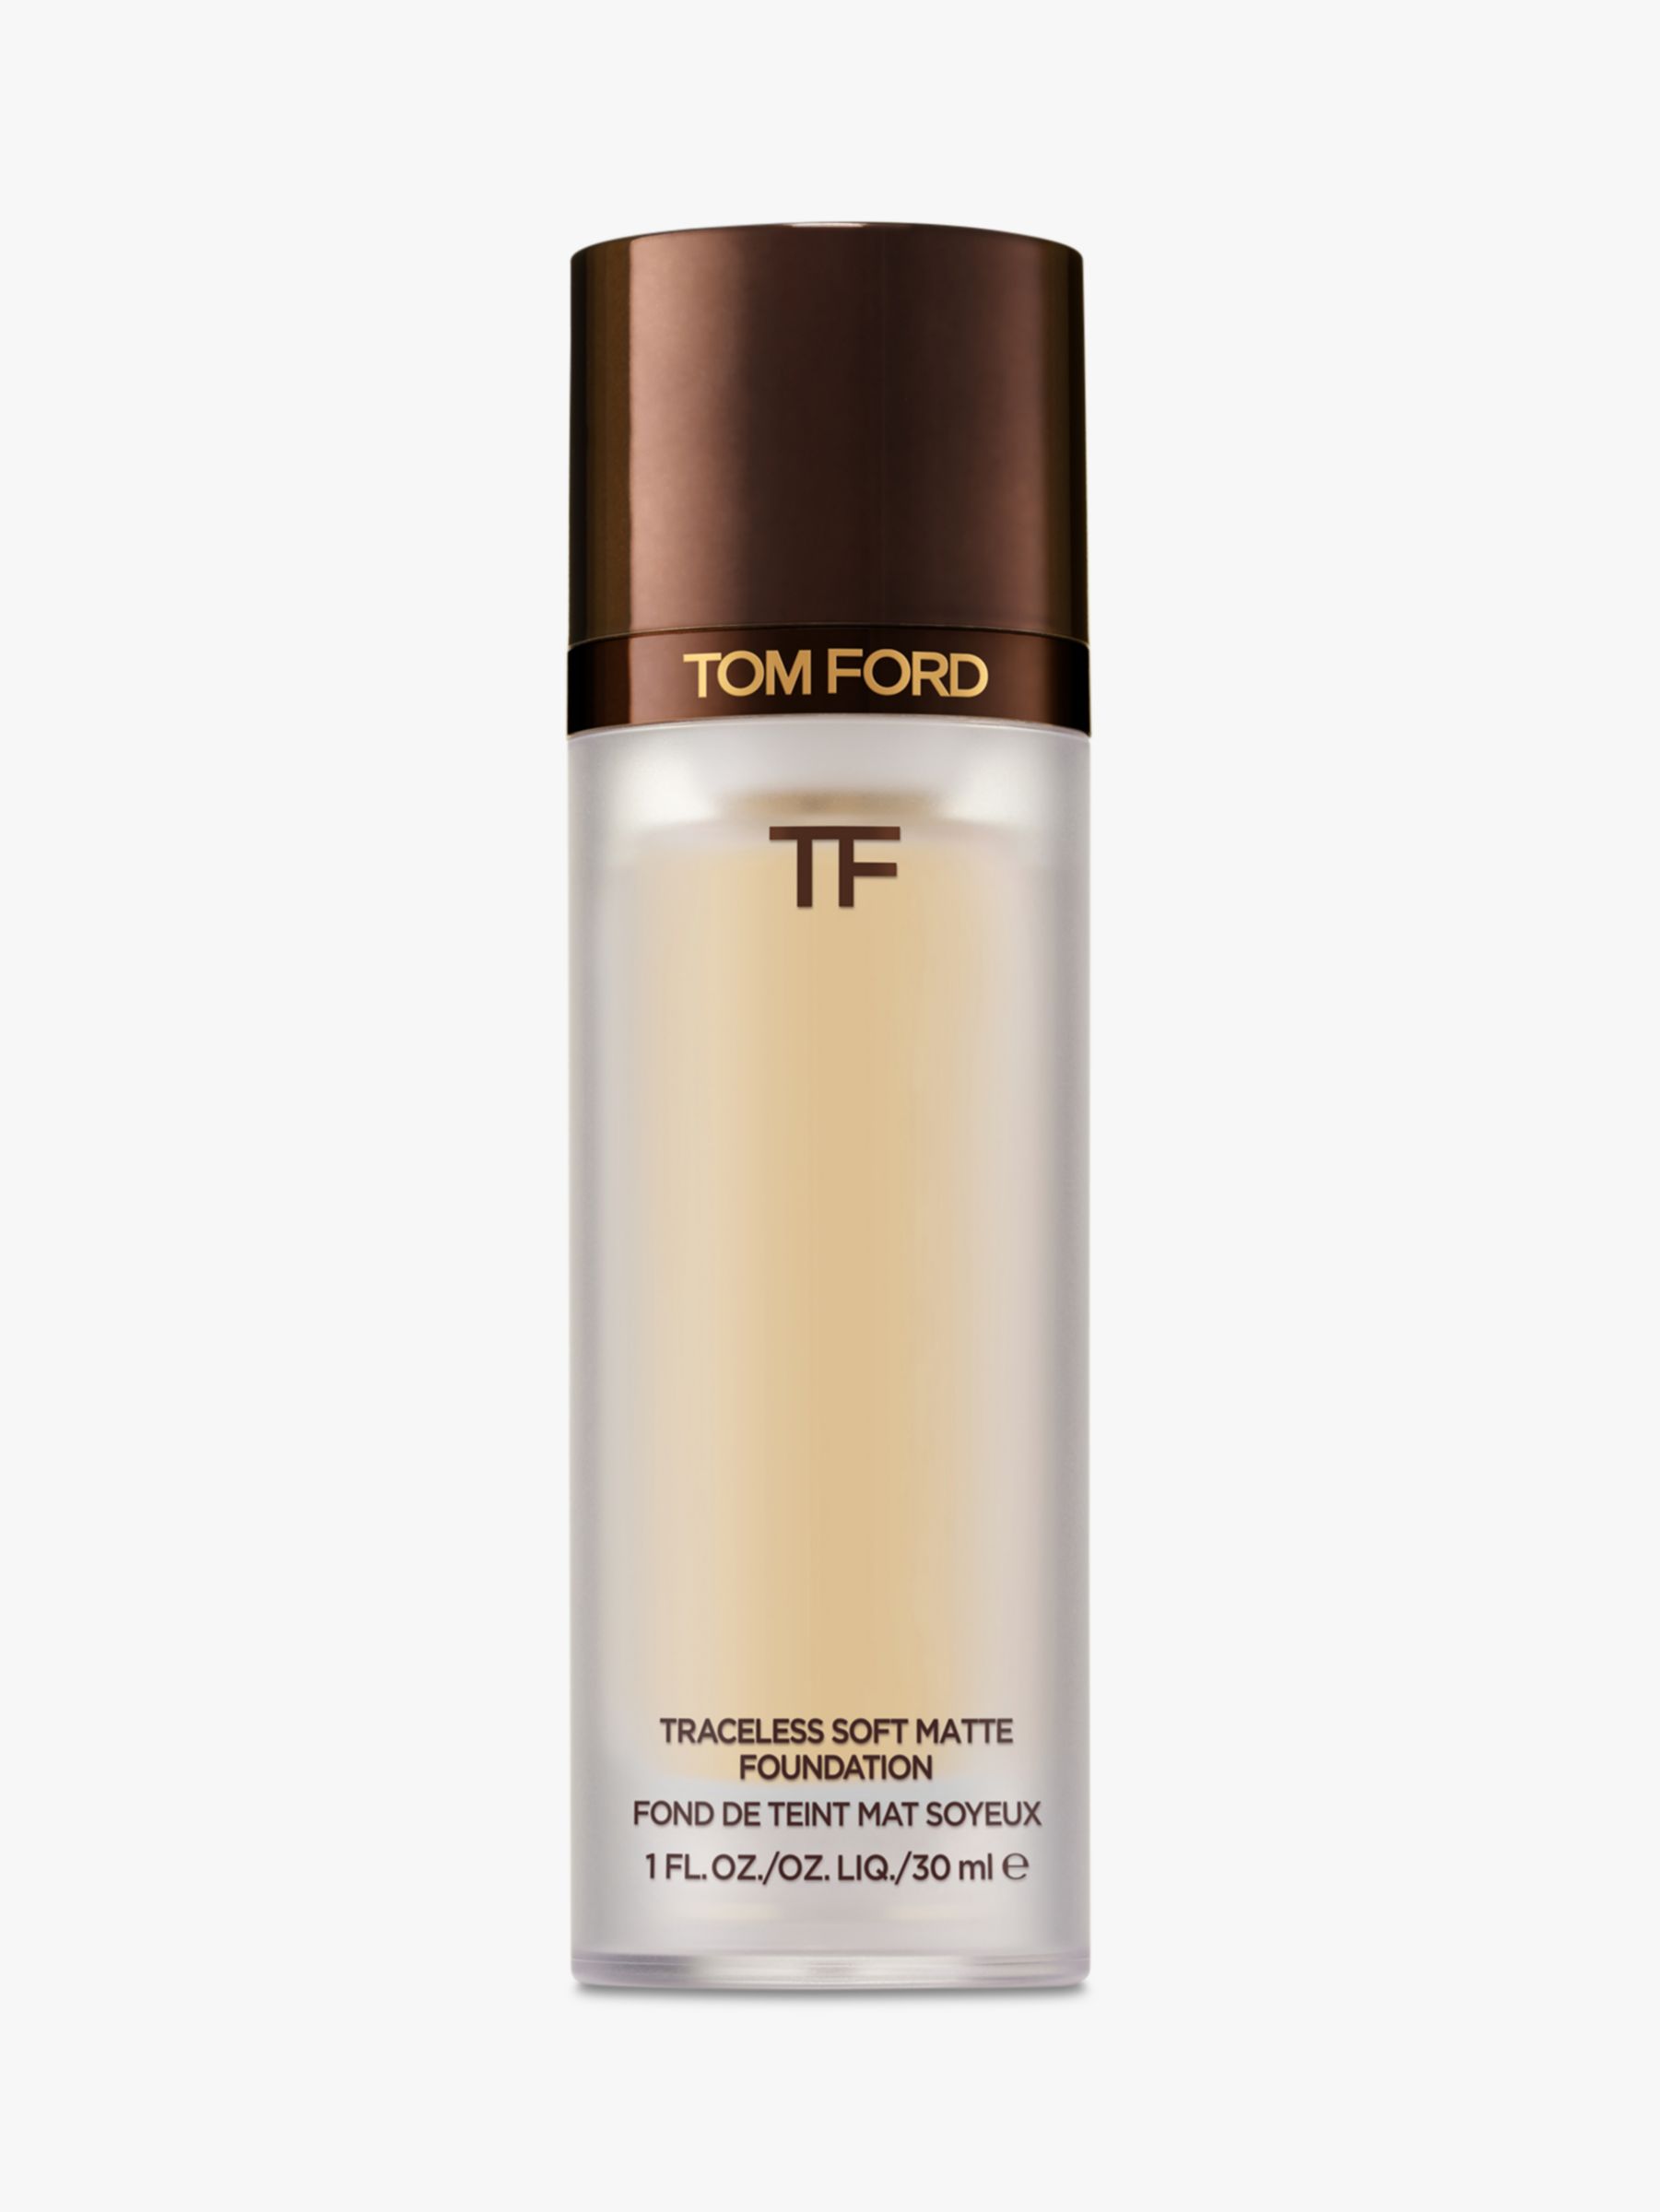 TOM FORD Traceless Soft Matte Foundation at John Lewis & Partners